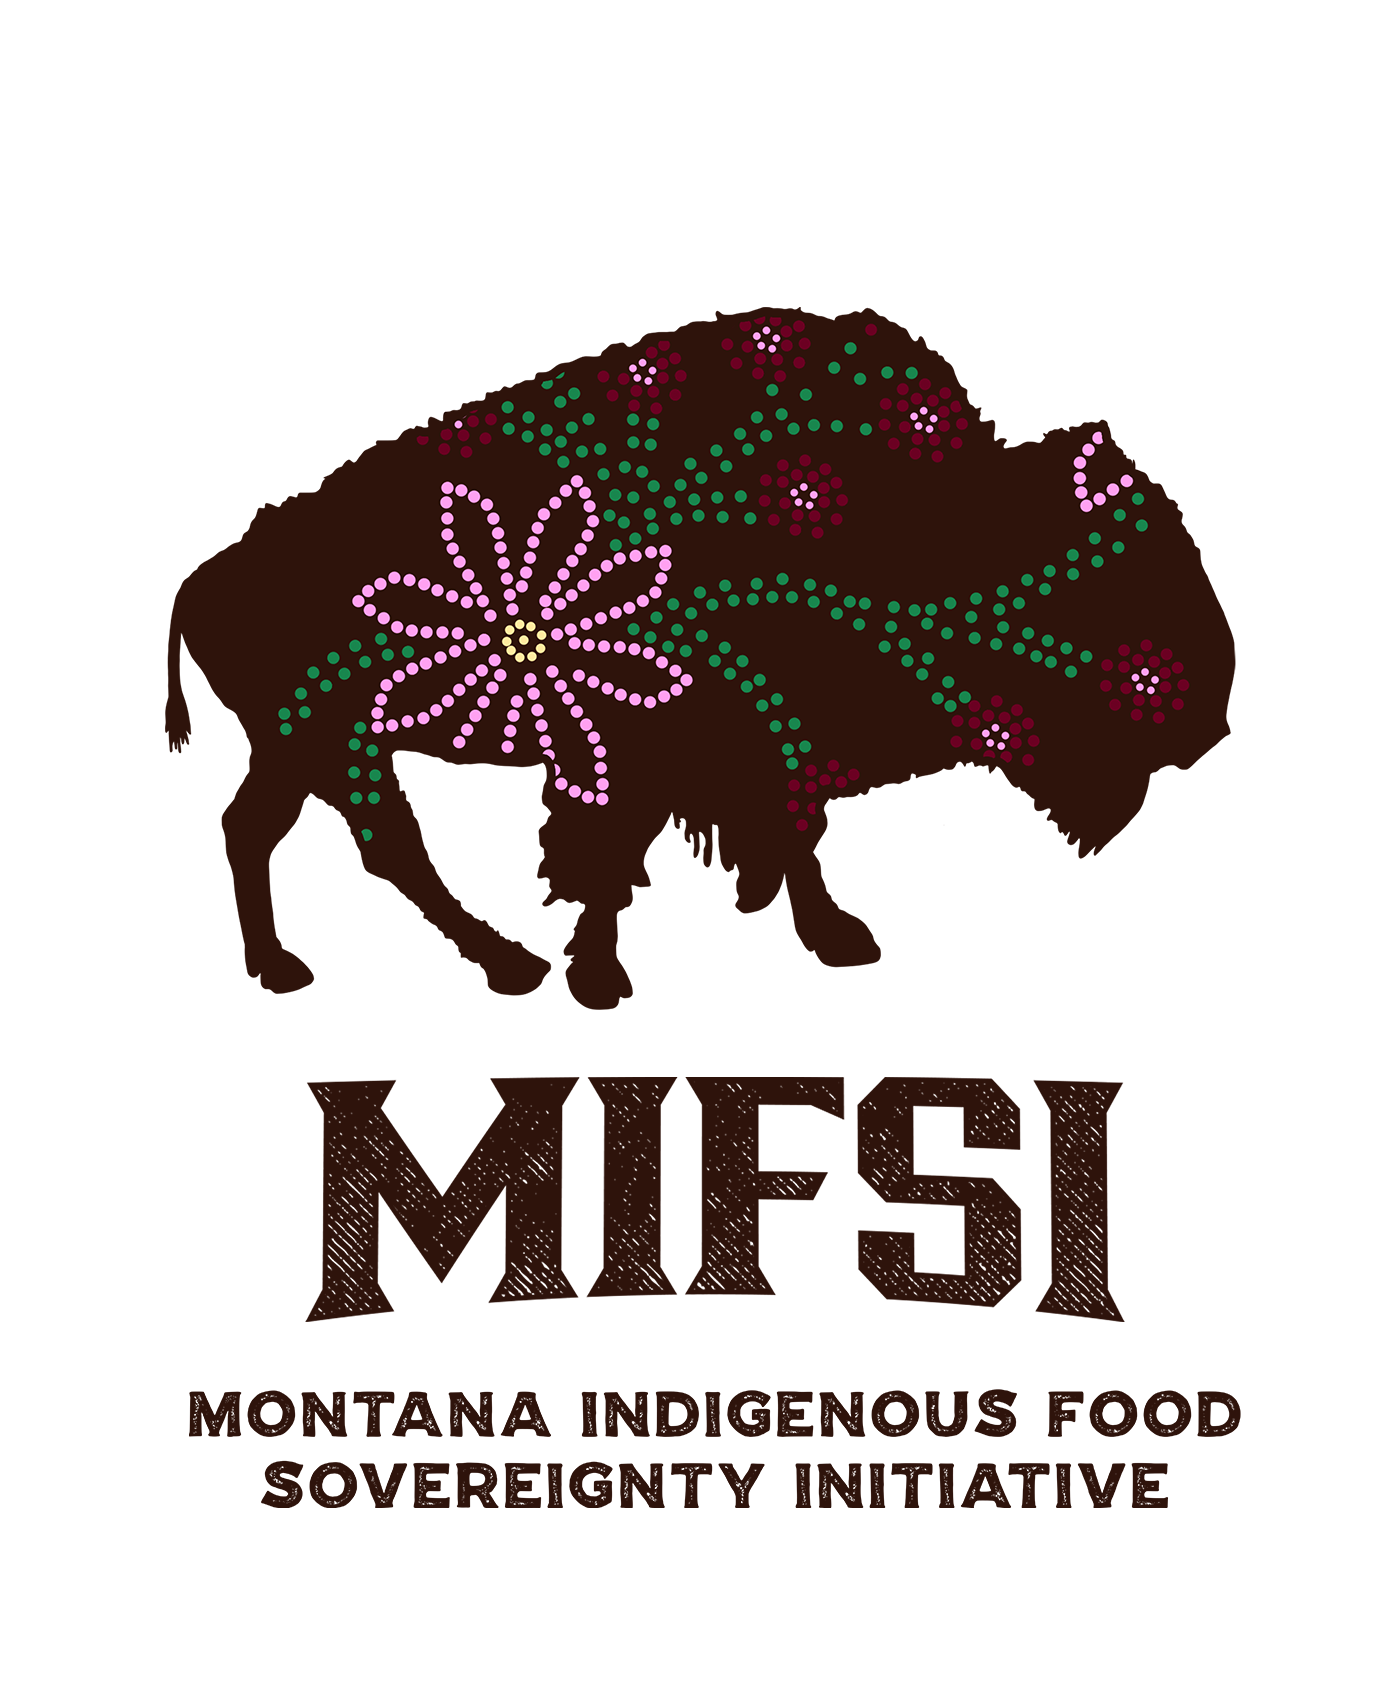 A logo of a bison with stylized flowers, with the words 'Montana Indigenous Food Sovereignty Initiative' below